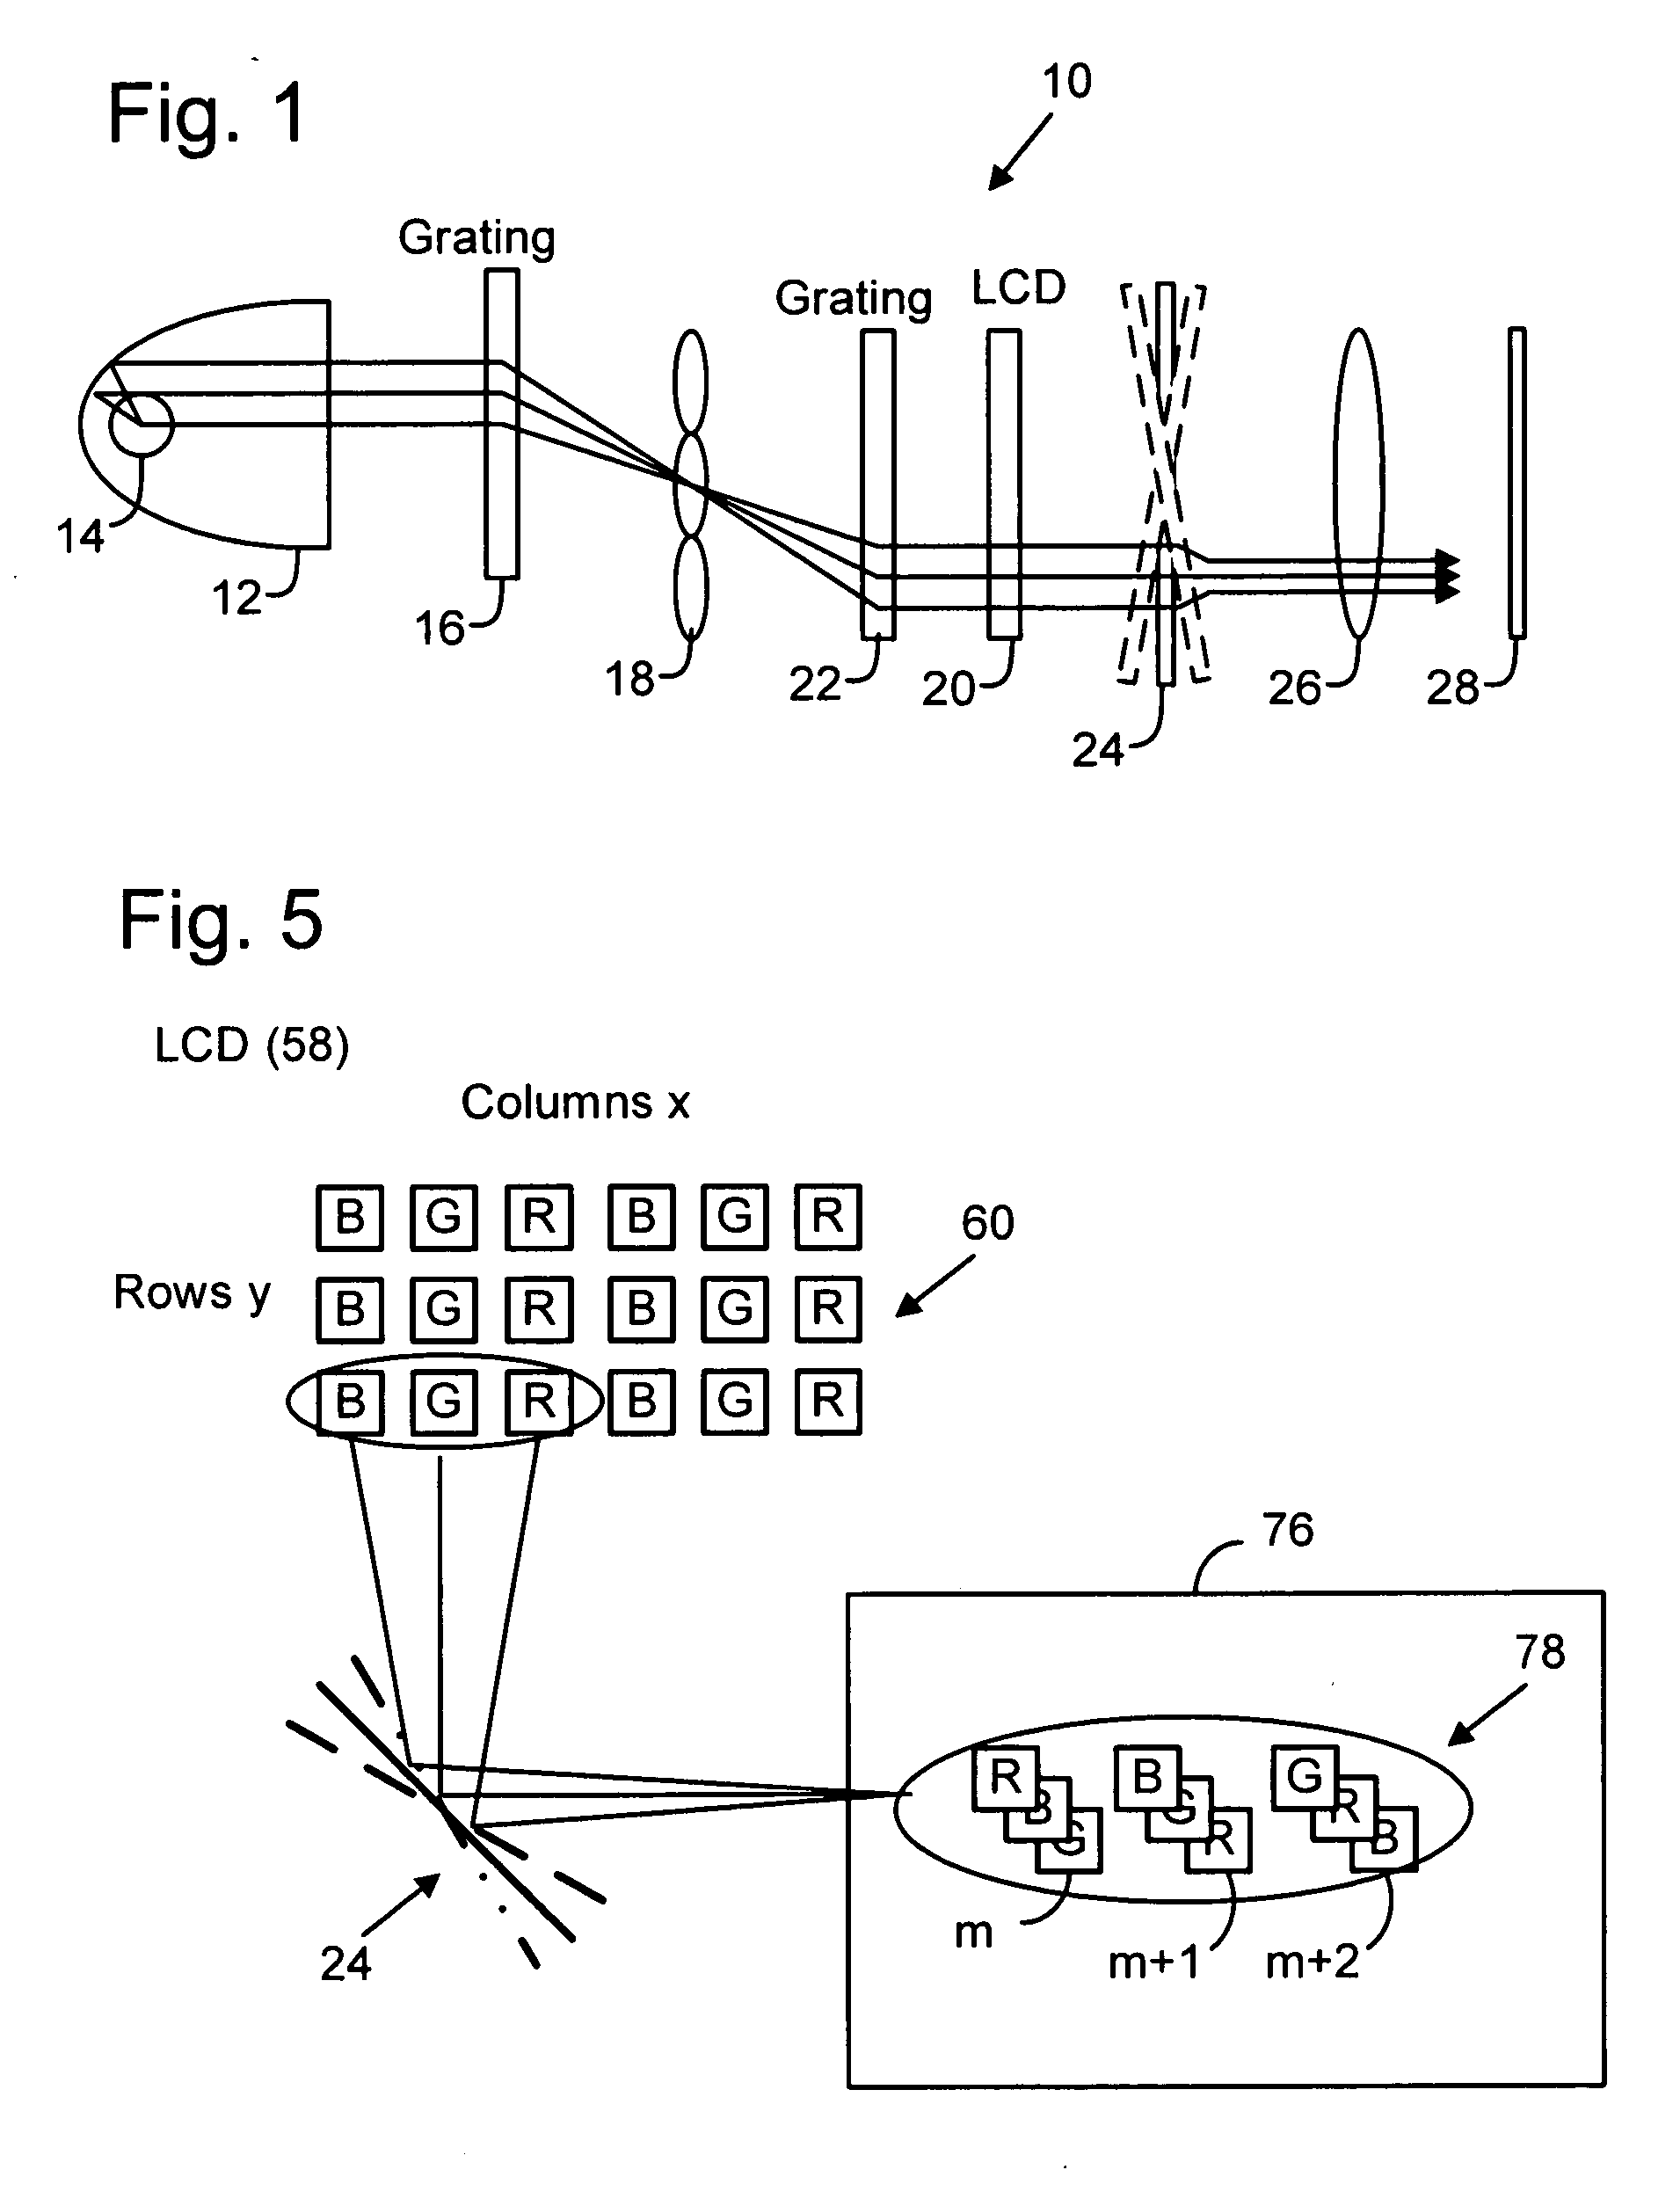 Dot-sequential color display system